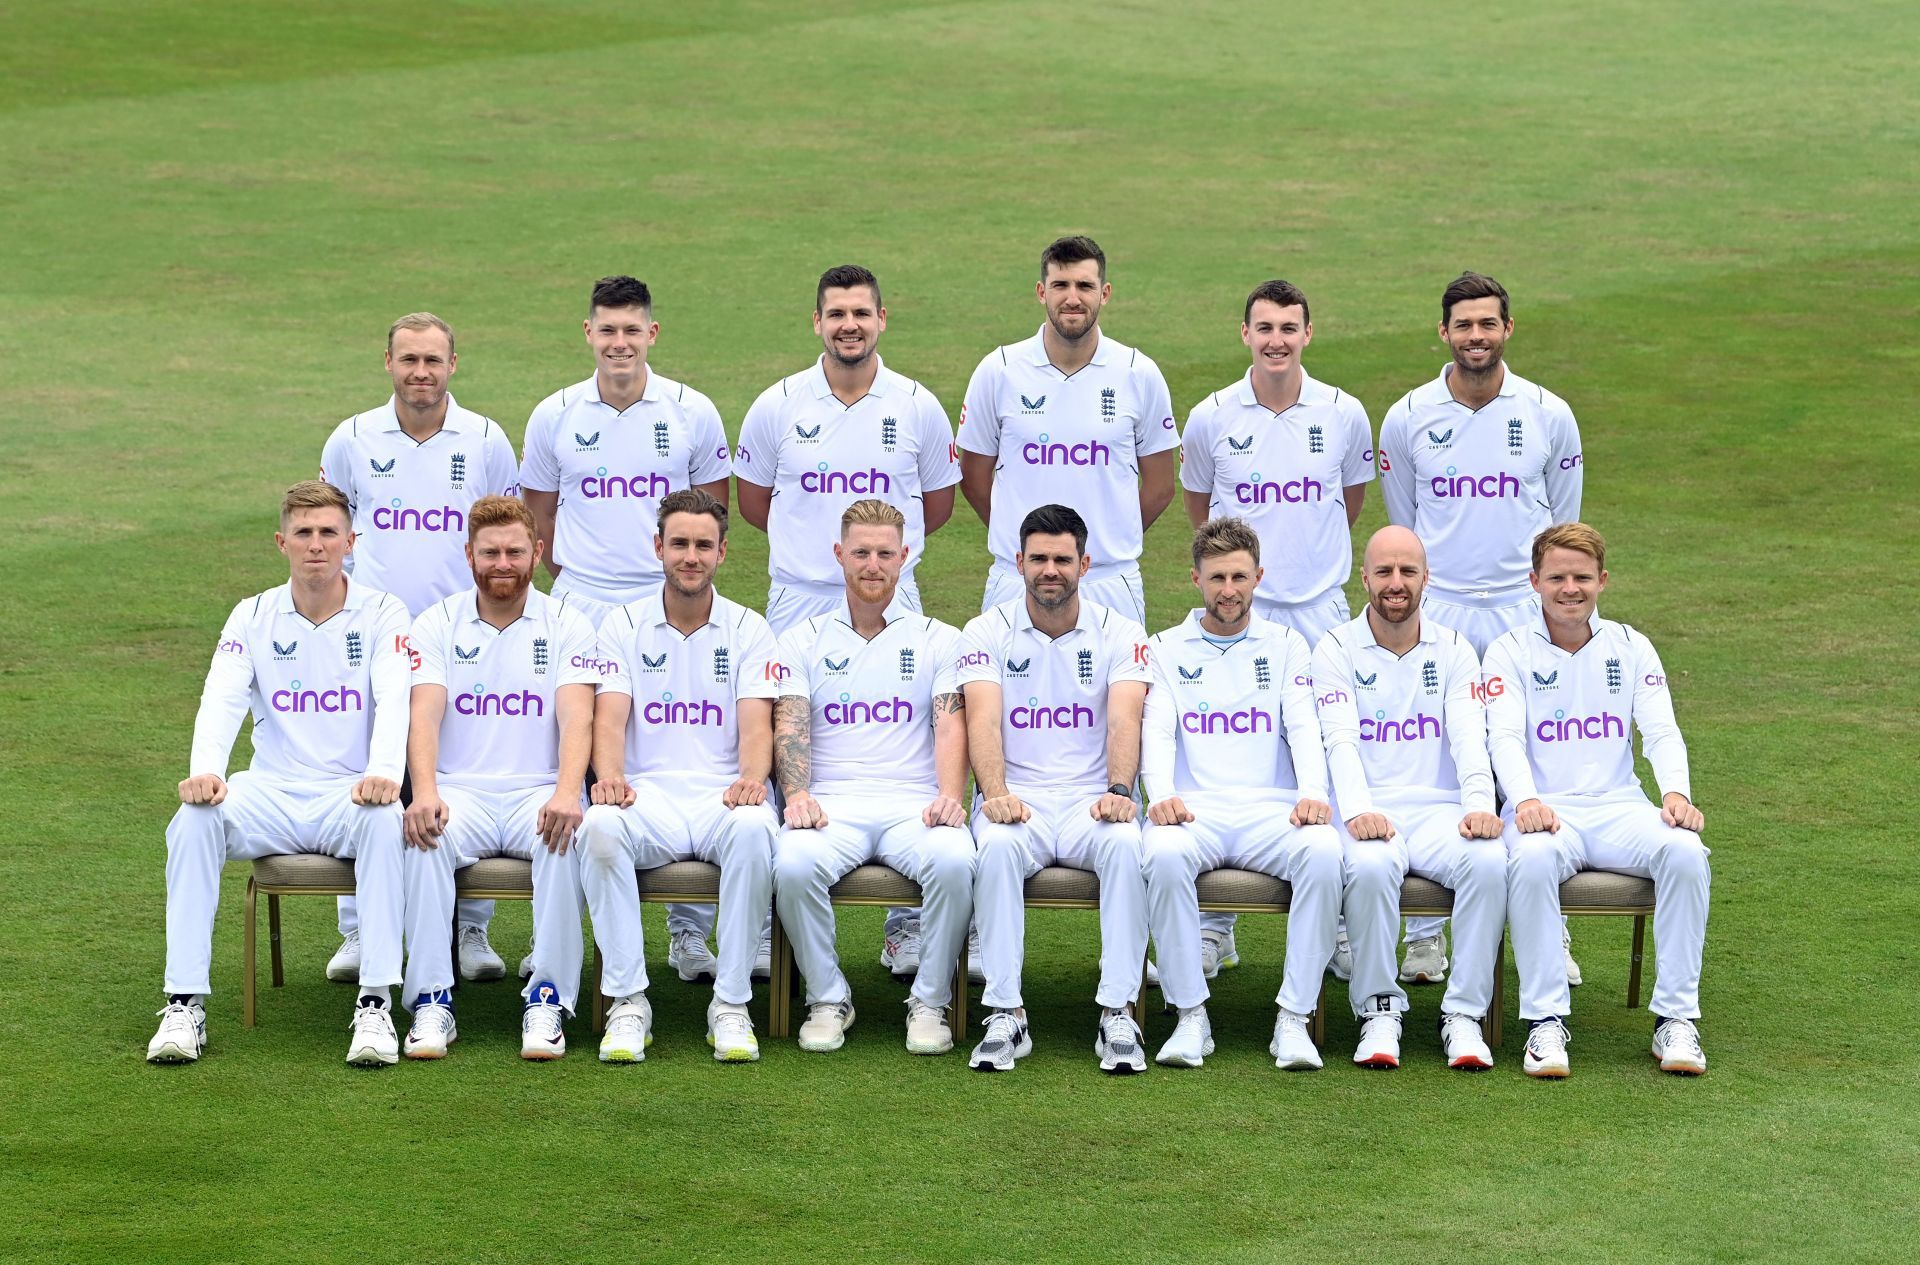 England have chosen to play the same team for the second Test